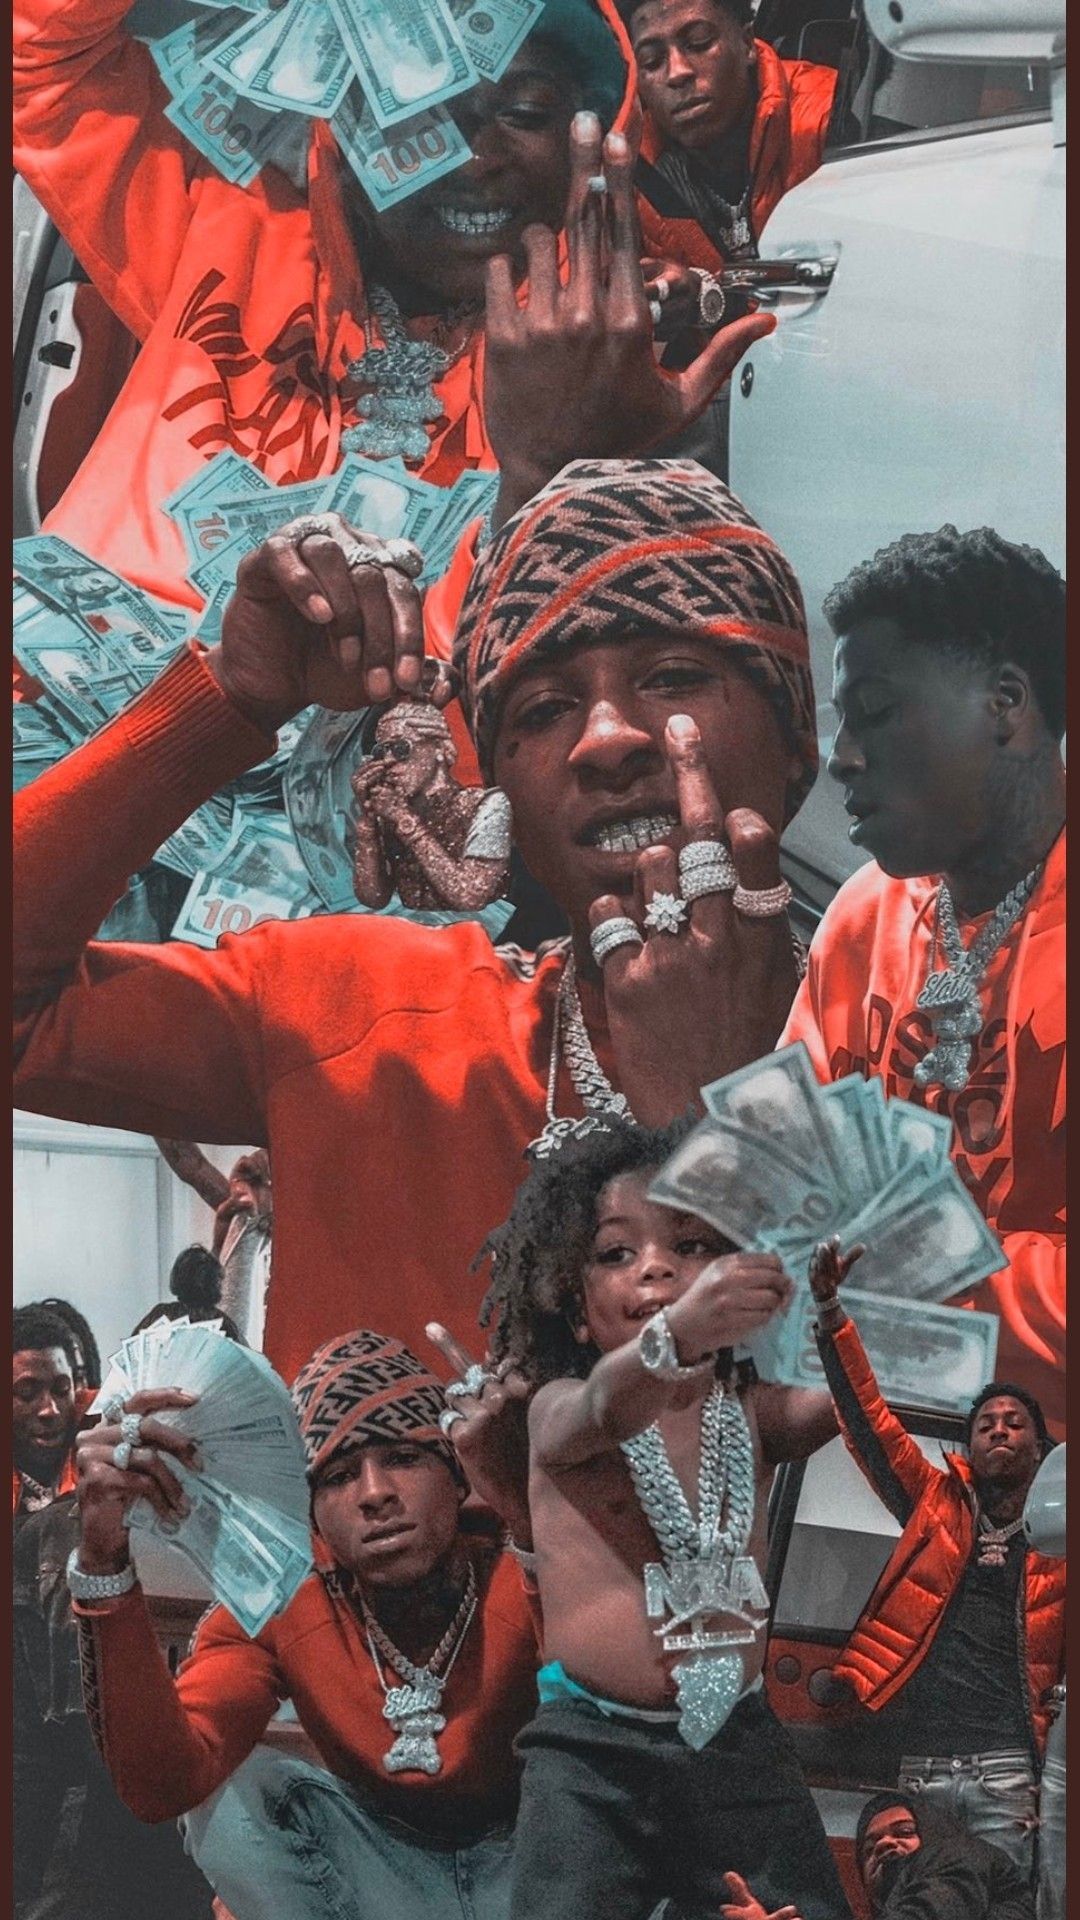 Youngboy Never Broke Again iPhone Wallpaper with high-resolution 1080x1920 pixel. You can use this wallpaper for your iPhone 5, 6, 7, 8, X, XS, XR backgrounds, Mobile Screensaver, or iPad Lock Screen - NBA